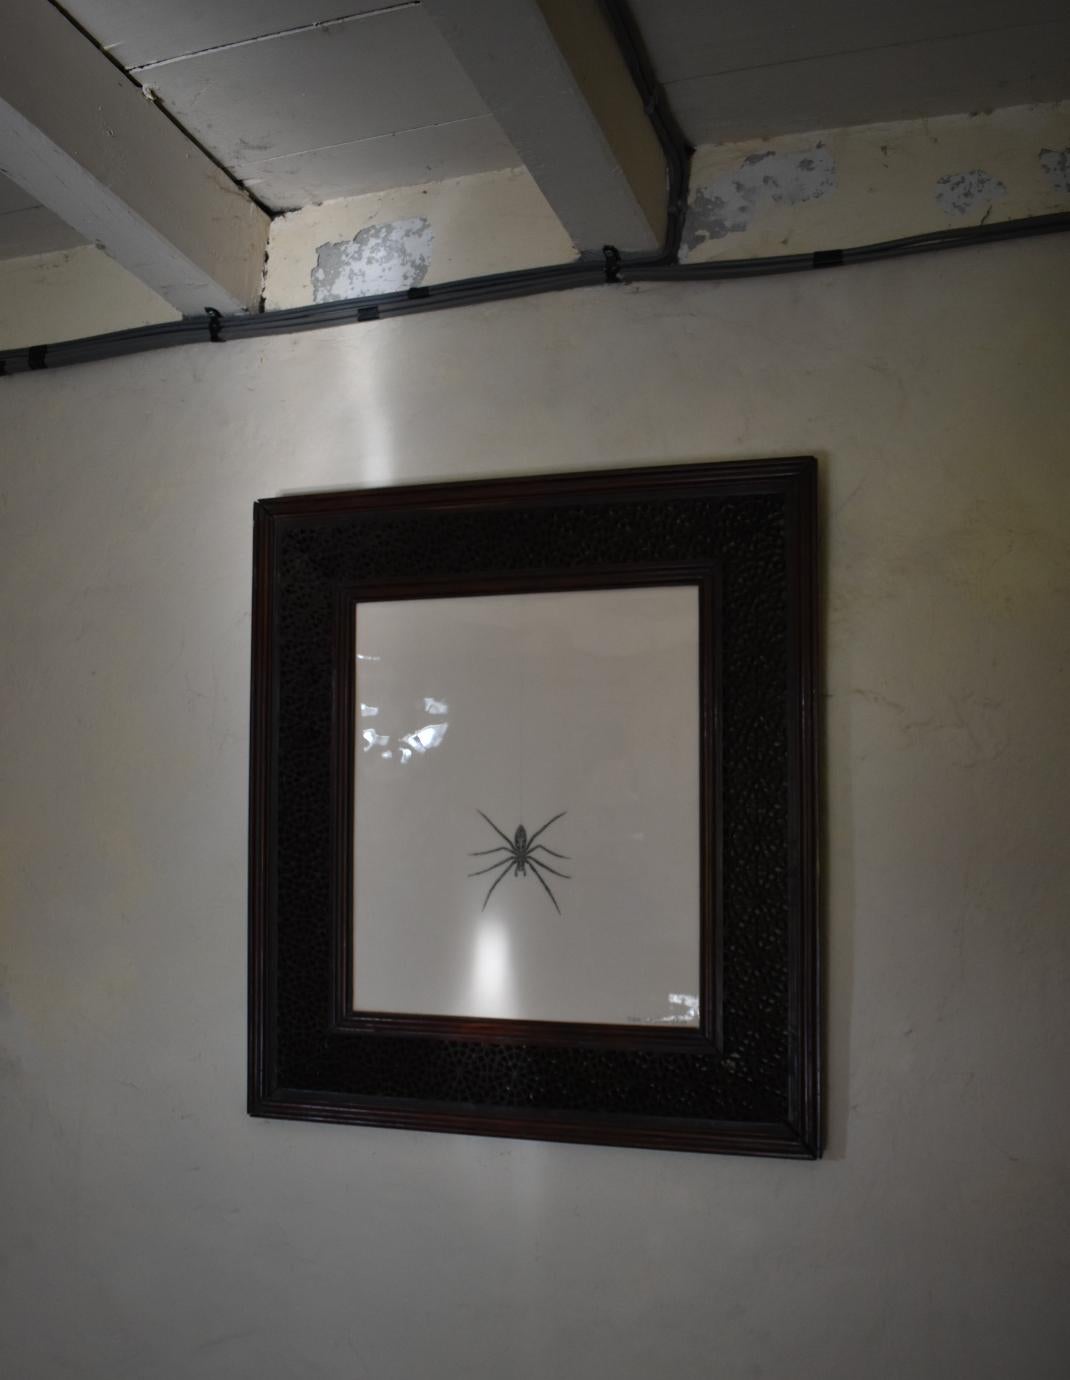 A giant house spider, in a hand-carved spiderweb patterned frame, circa 1880 - Mixed Media Art by Tom Rooth